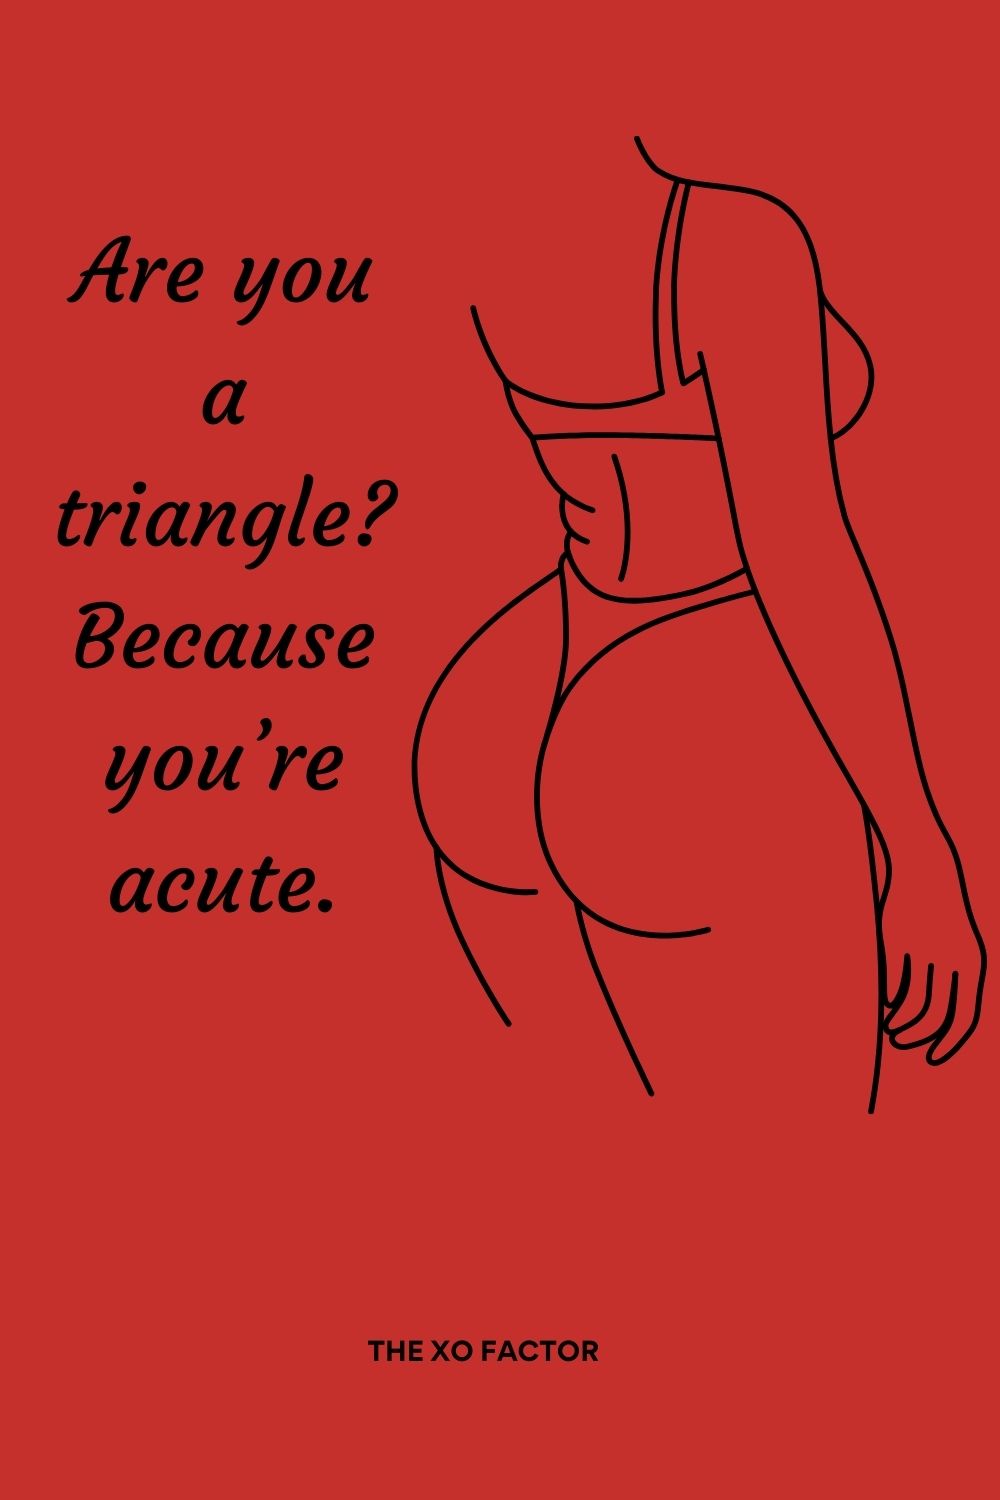 Are you a triangle? Because you’re acute.